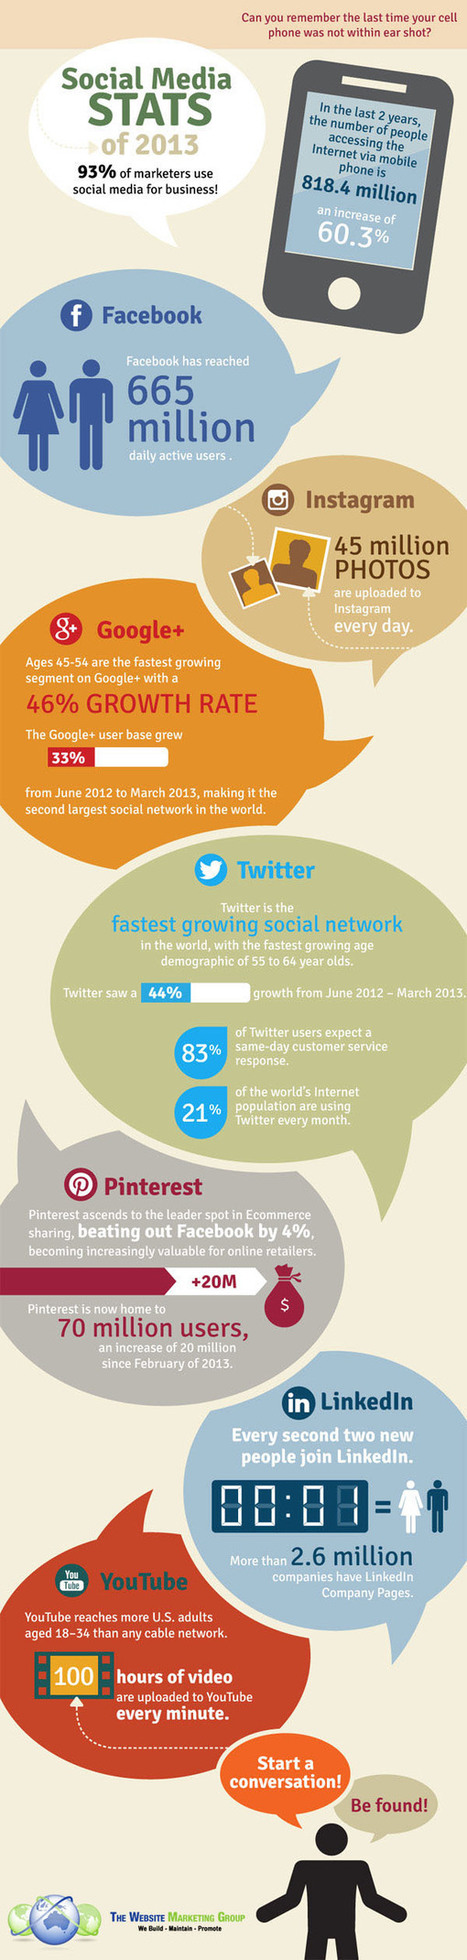 Social Media Infographic 2013 : Which platform is growing the fastest? | KILUVU | Scoop.it